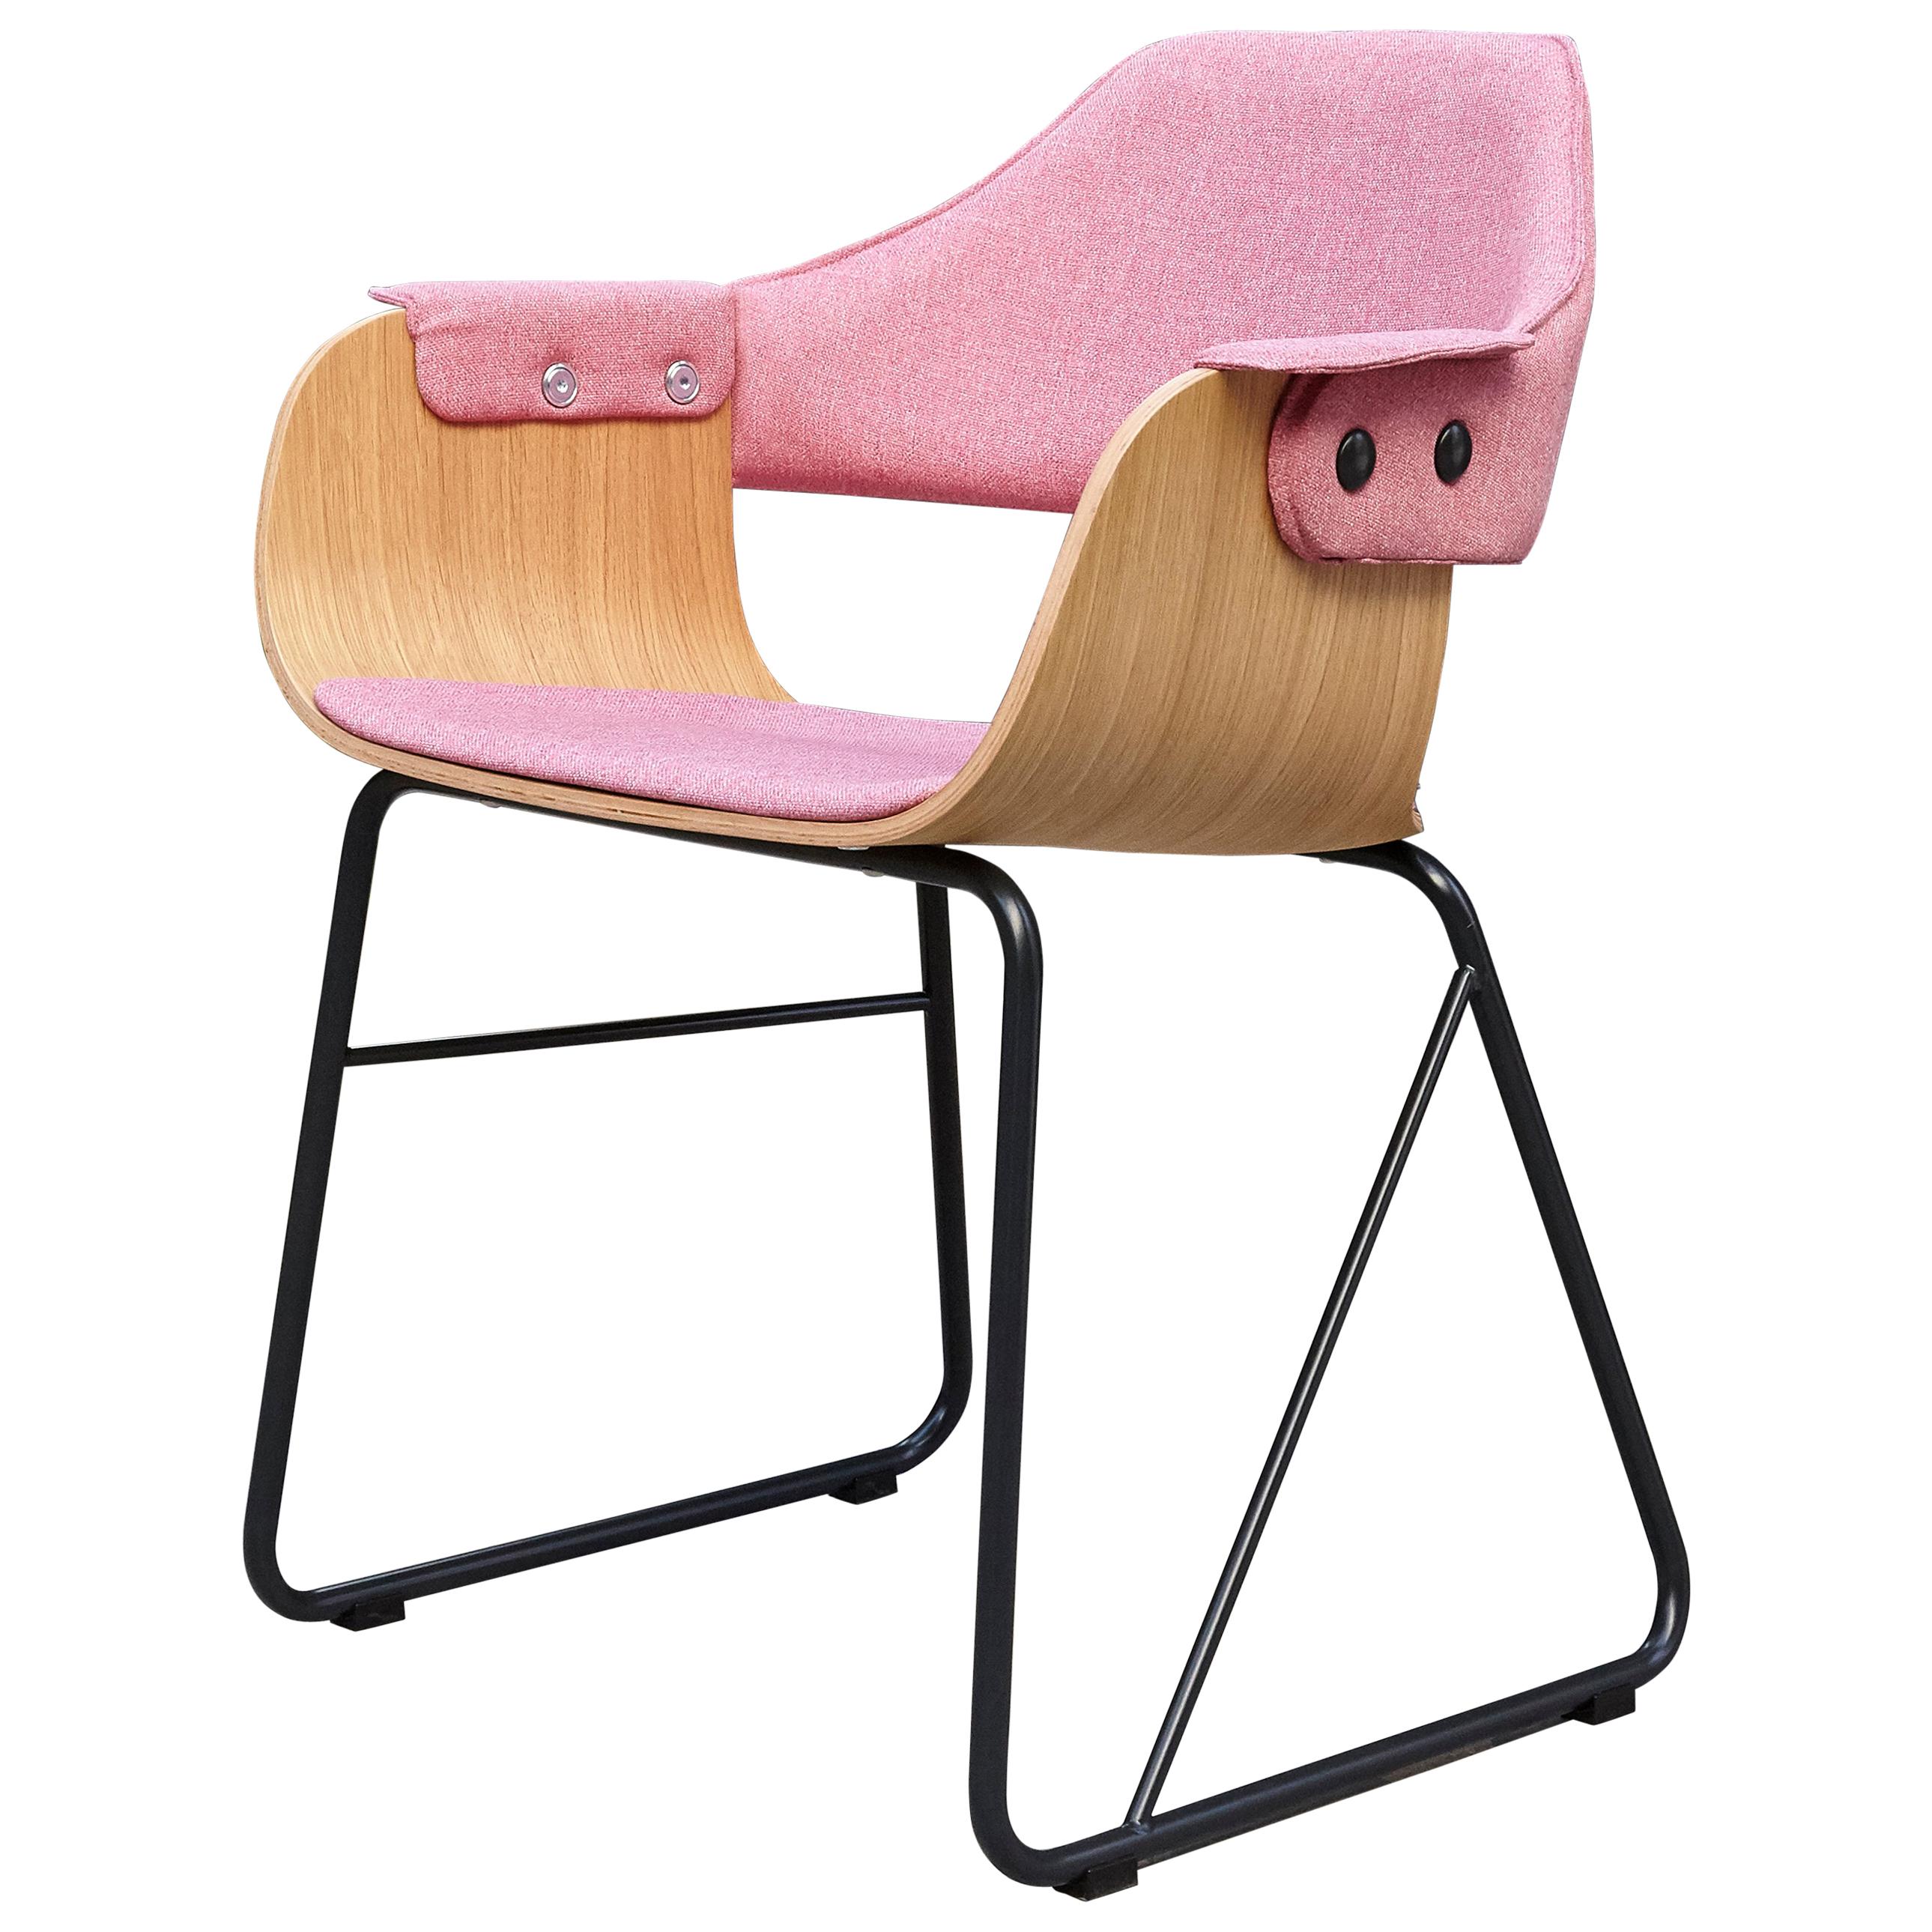 Jaime Hayon Contemporary Pink Upholstered Wood Chair Showtime by BD Barcelona